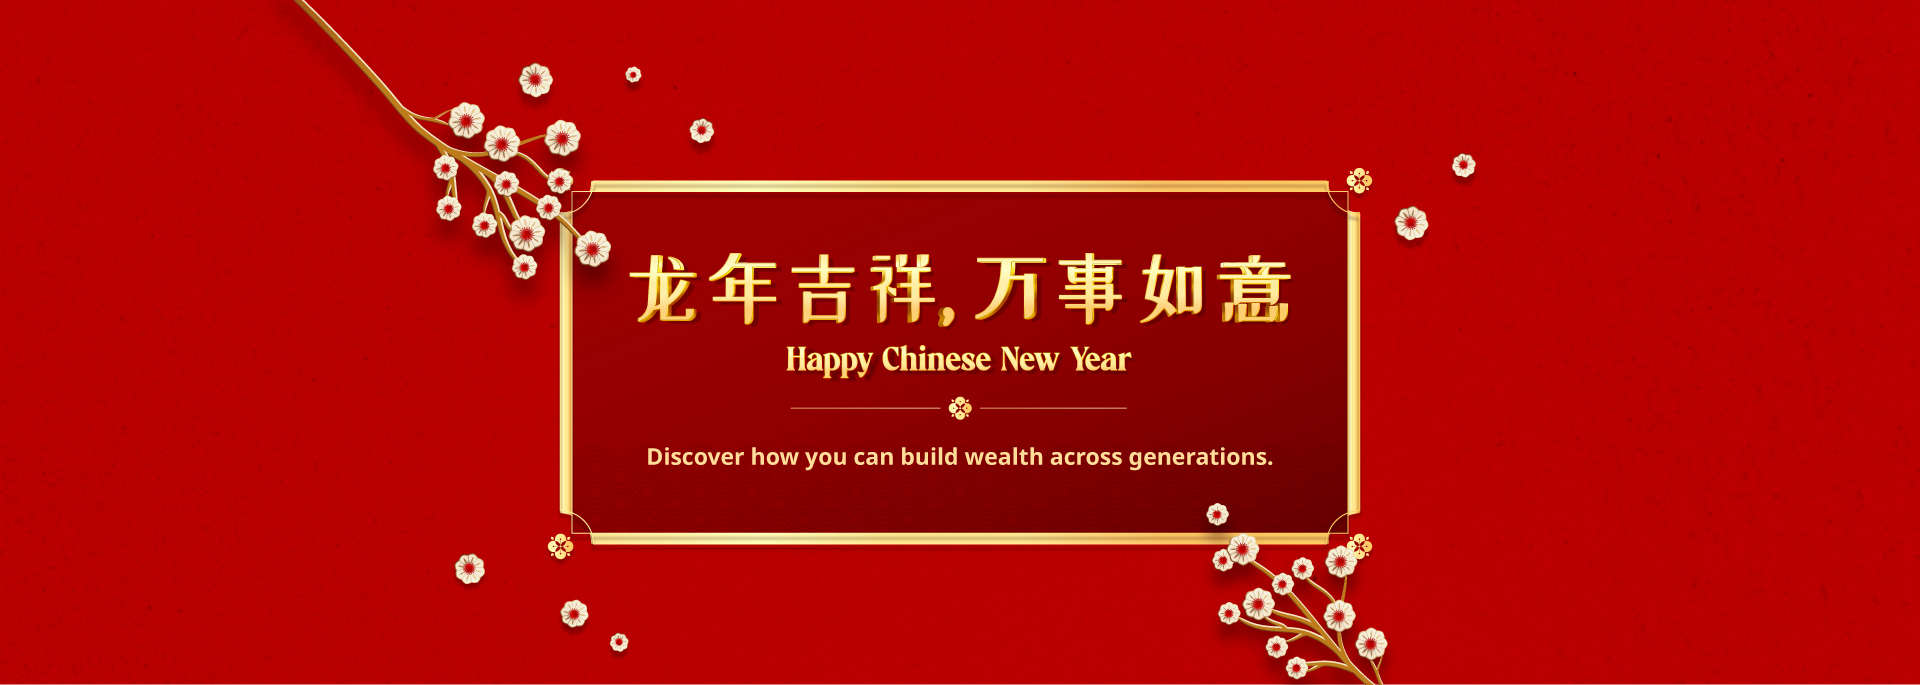 HLB Chinese New Year Promotions